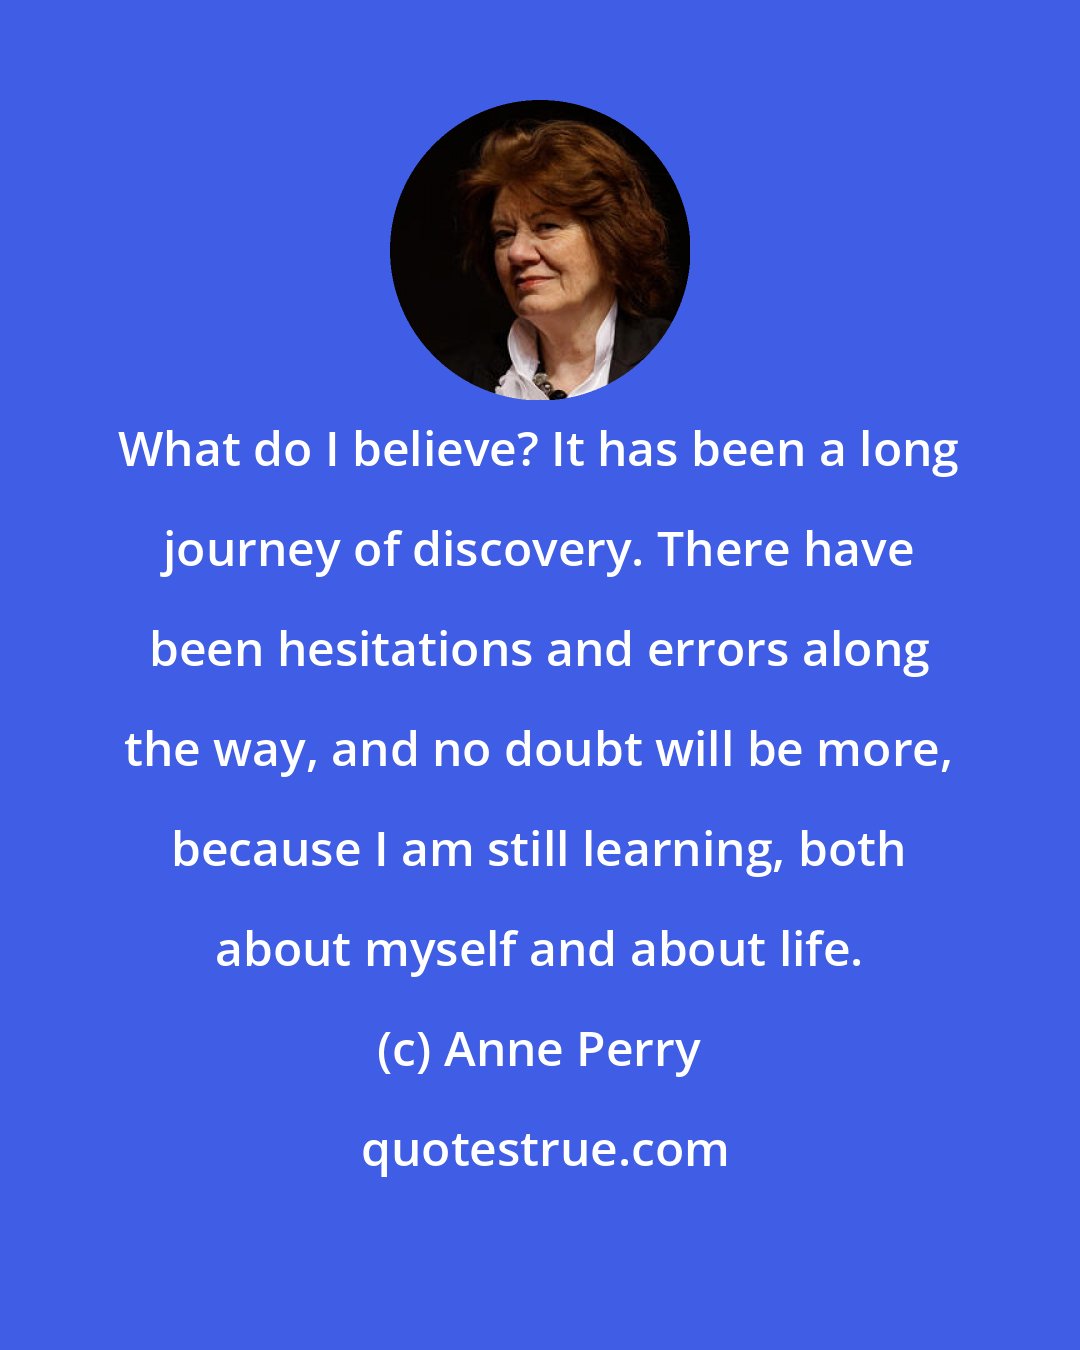 Anne Perry: What do I believe? It has been a long journey of discovery. There have been hesitations and errors along the way, and no doubt will be more, because I am still learning, both about myself and about life.